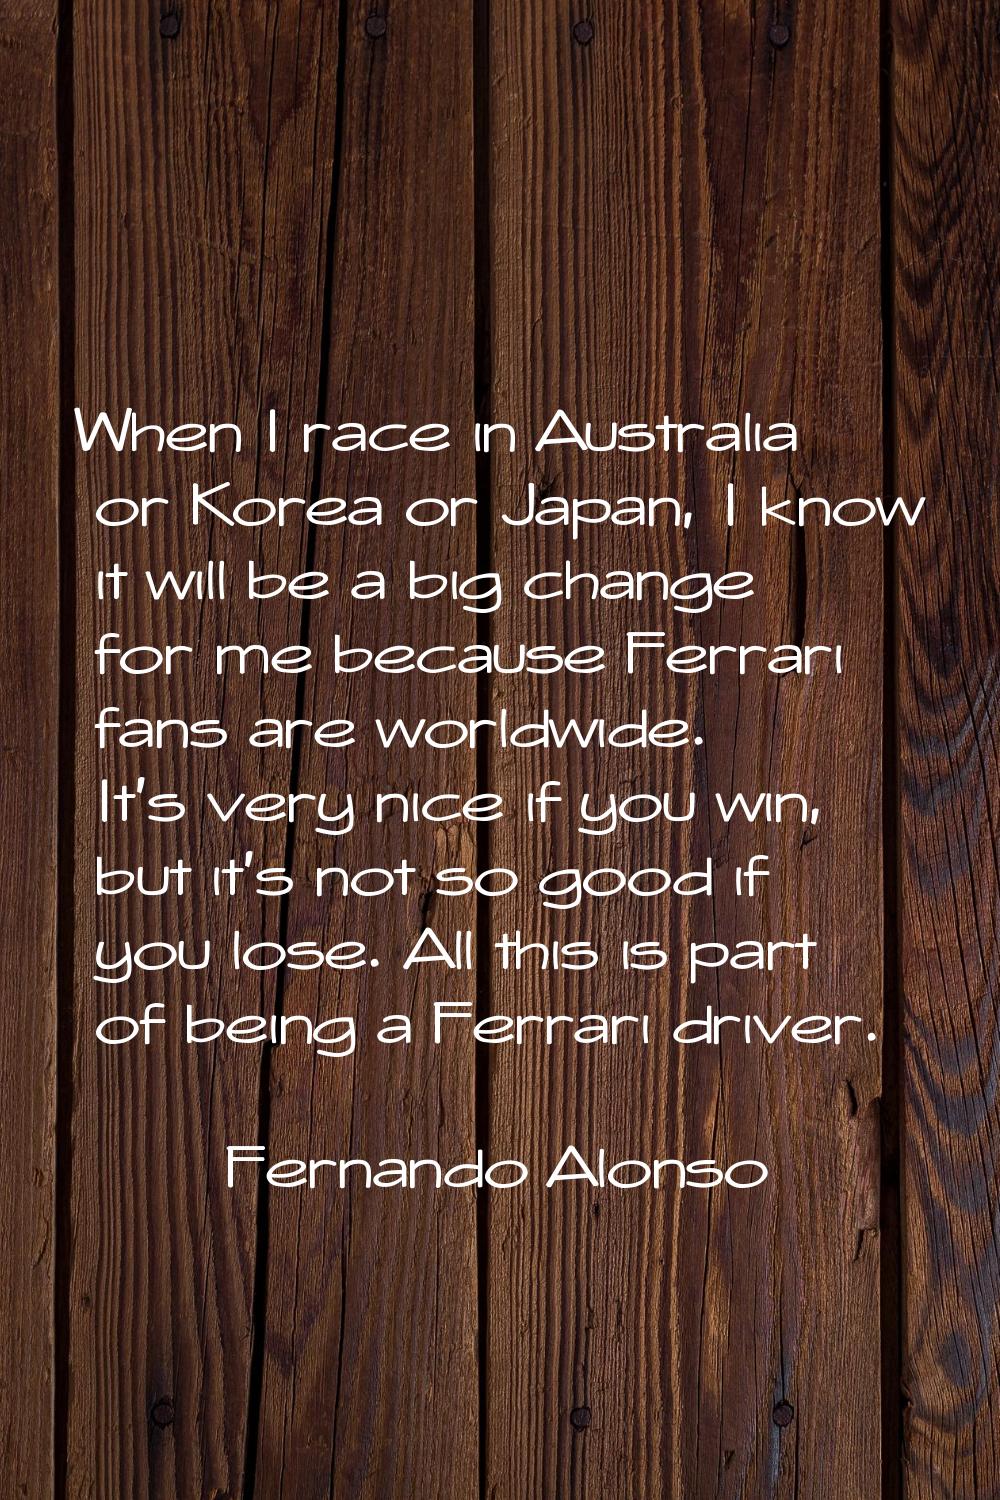 When I race in Australia or Korea or Japan, I know it will be a big change for me because Ferrari f